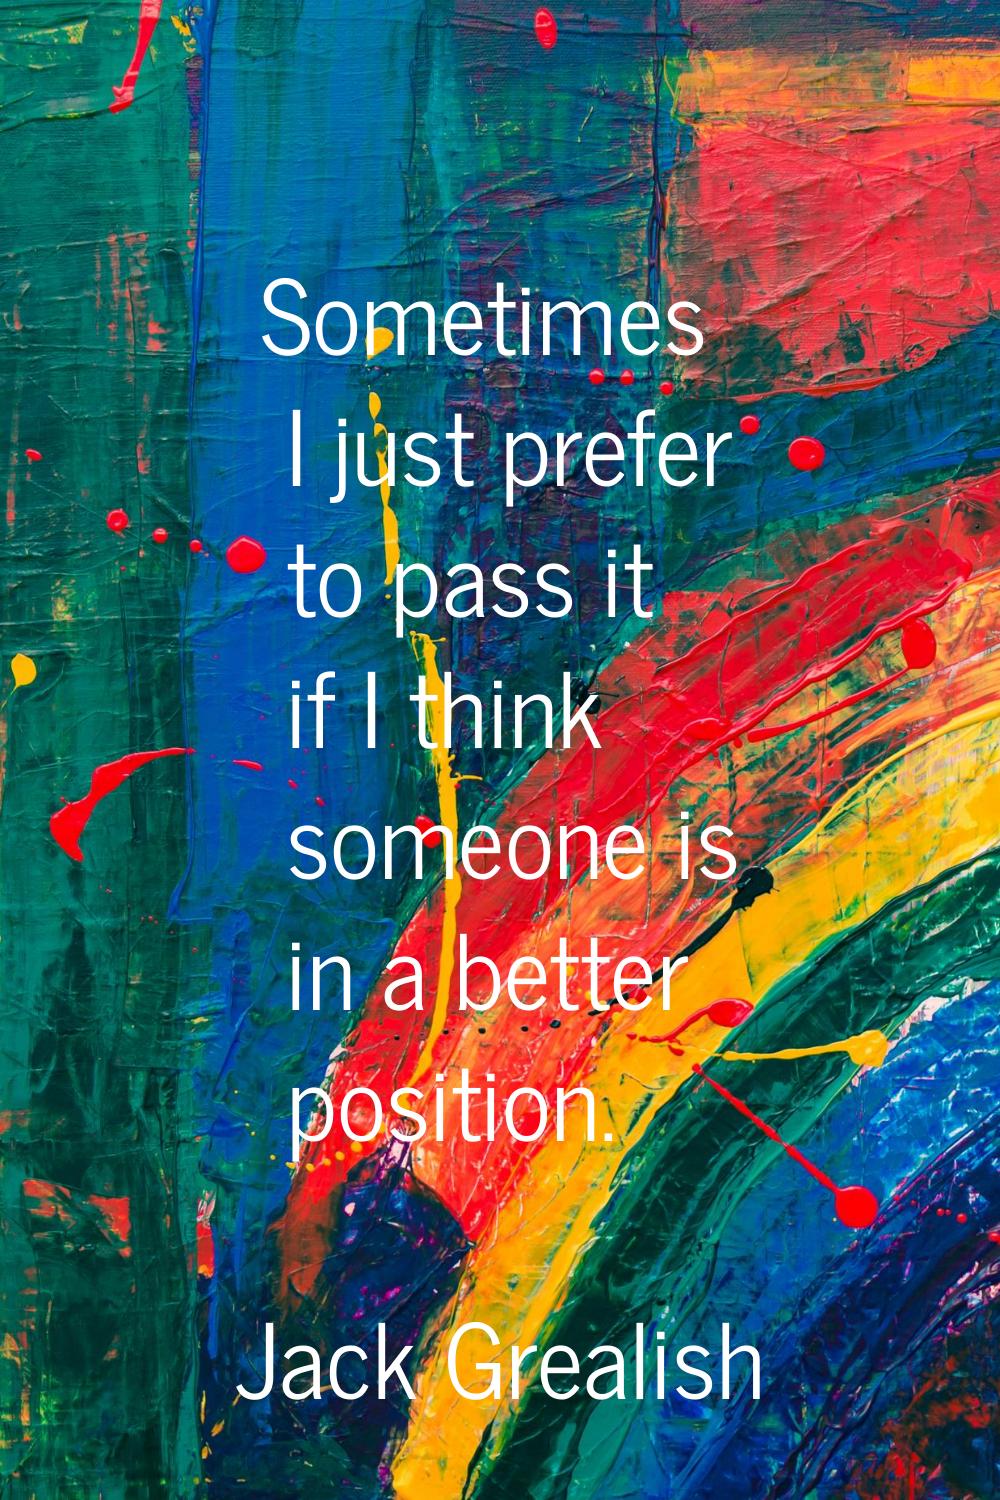 Sometimes I just prefer to pass it if I think someone is in a better position.